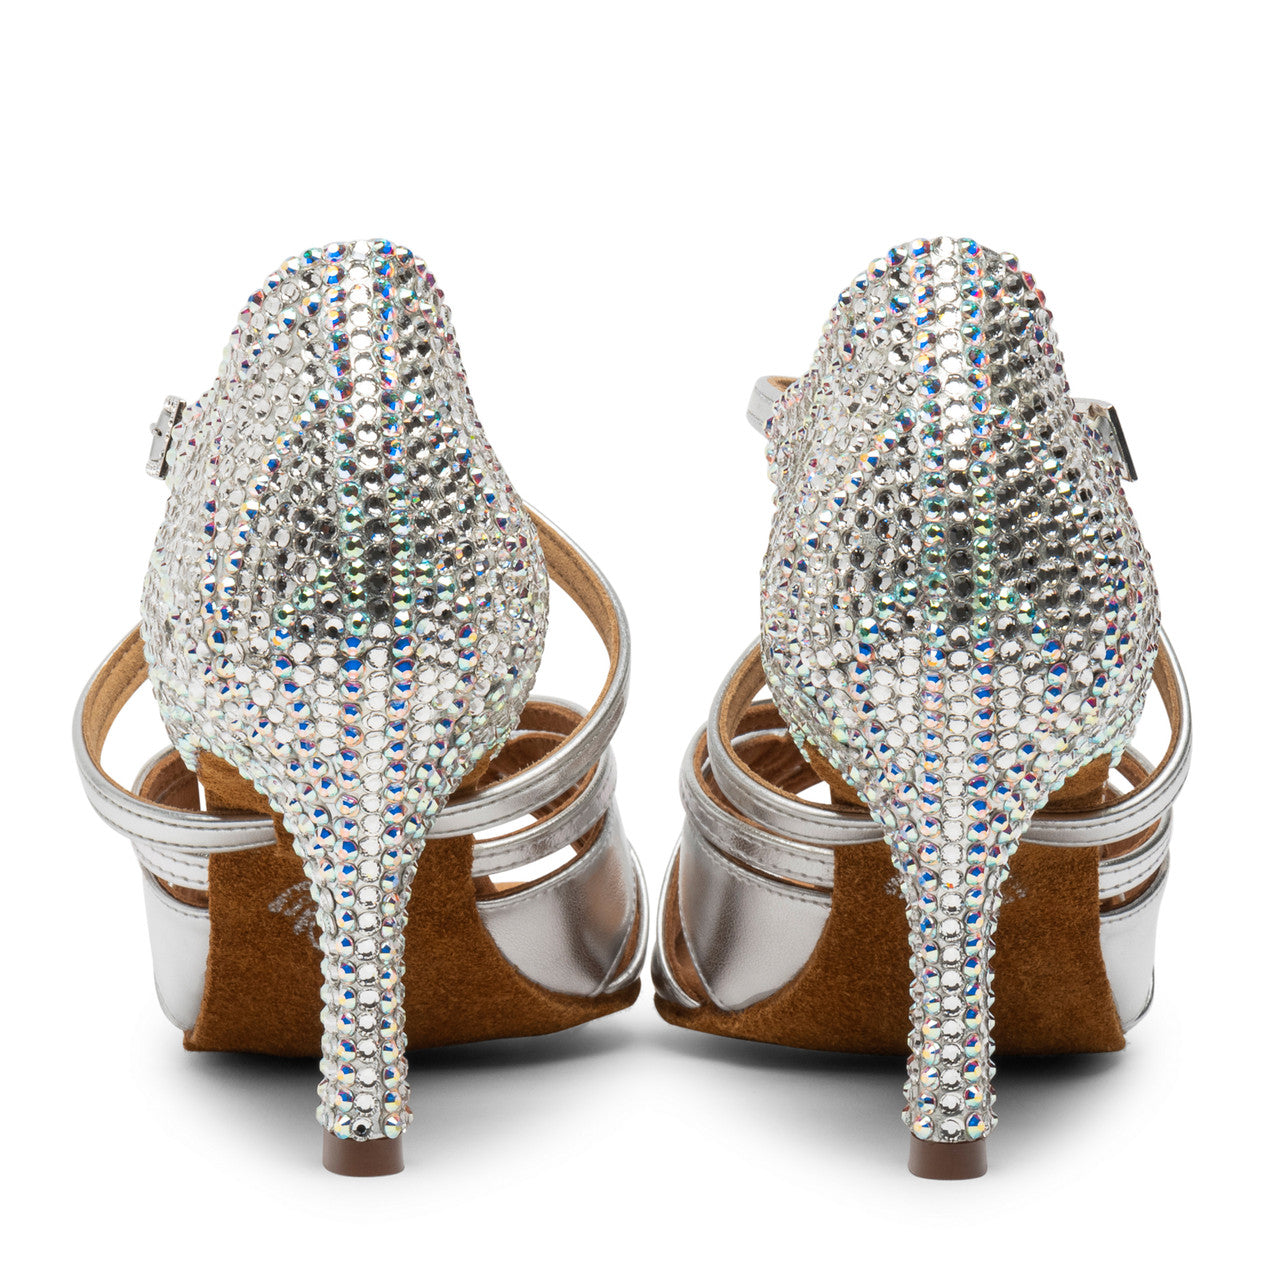 International Dance Shoes IDS Silver Mia by Lauren Latin Shoe Covered in Preciosa Crystals